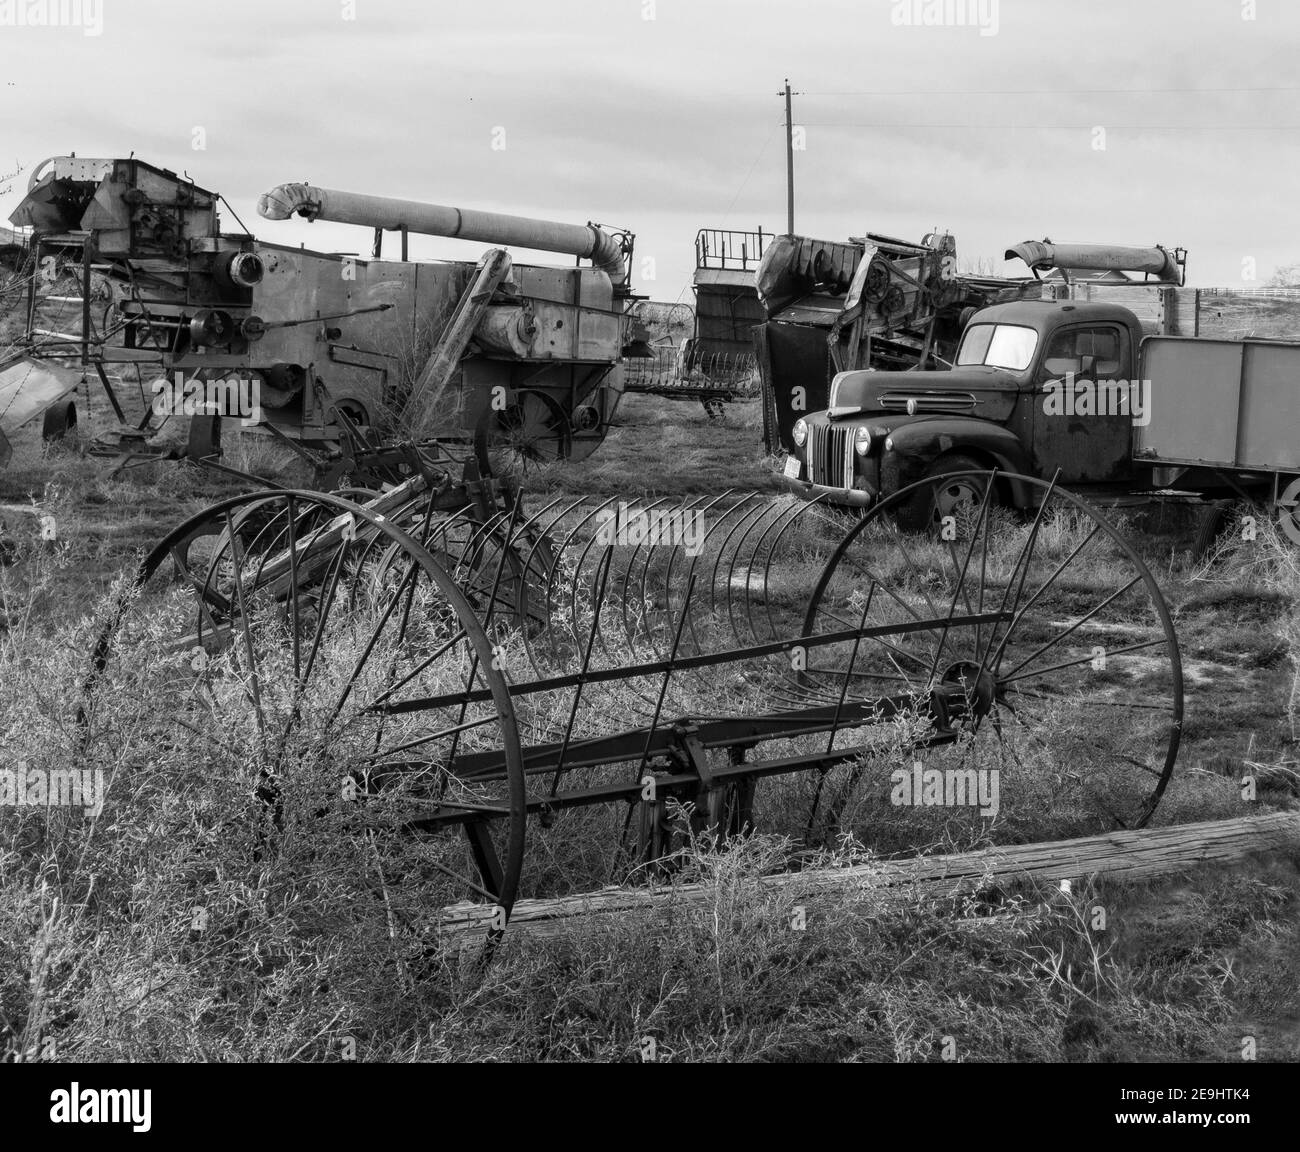 Old truck and farm equipment in rural southwest Idaho Stock Photo